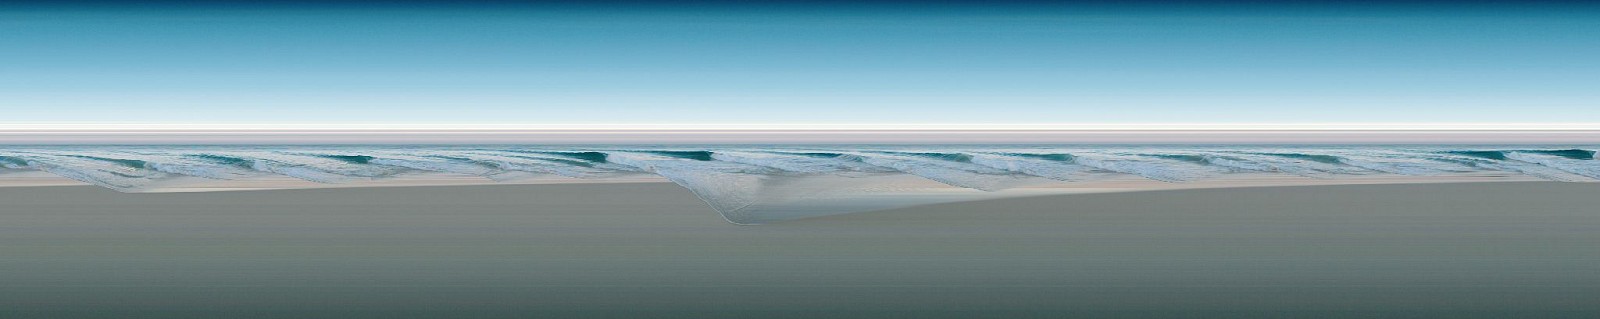 Jay Mark Johnson, SEAL ROCK WAVES #16, 2012 Australia
archival pigment on paper, mounted on aluminum, 40 x 200 in. (101.6 x 508 cm)